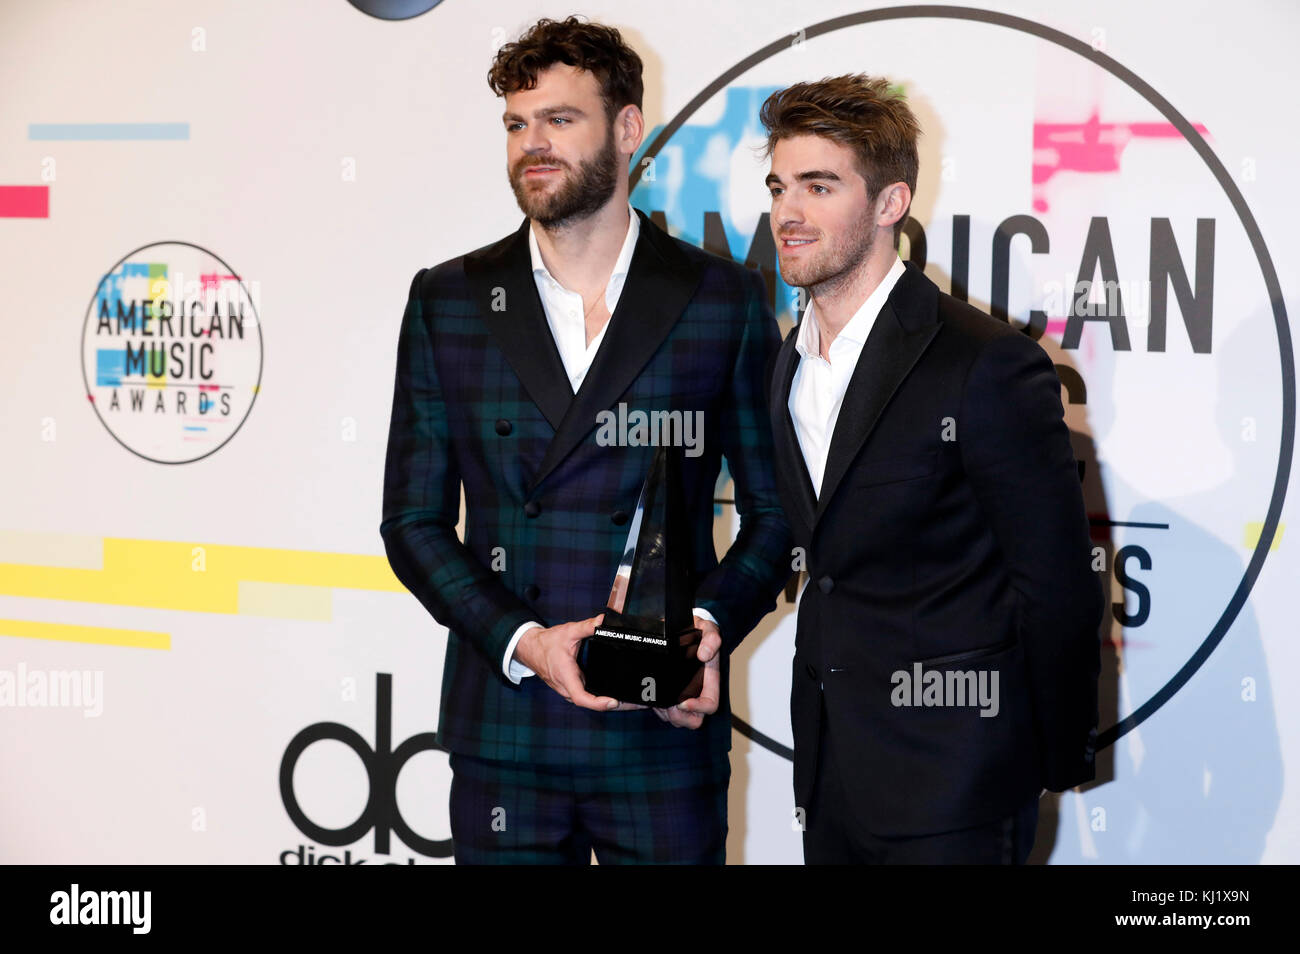 Alex Pall and Andrew Taggart (The Chainsmokers) attend the 2017 American Music Awards at Microsoft Theater on November 19, 2017 in Los Angeles, California. Stock Photo